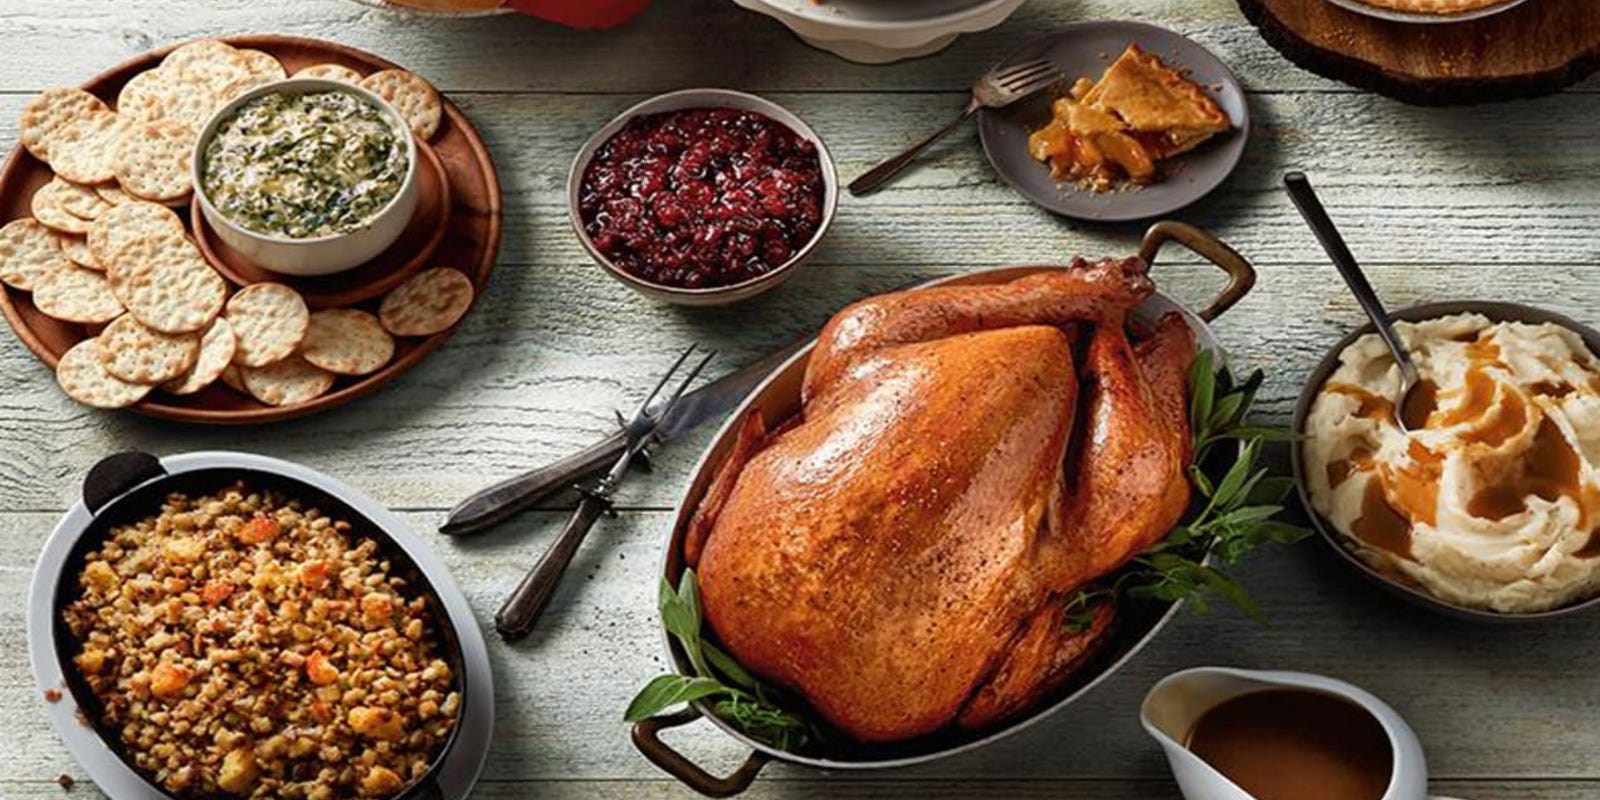 Thanksgiving 2020 Walmart musthaves for your Turkey Day checklist